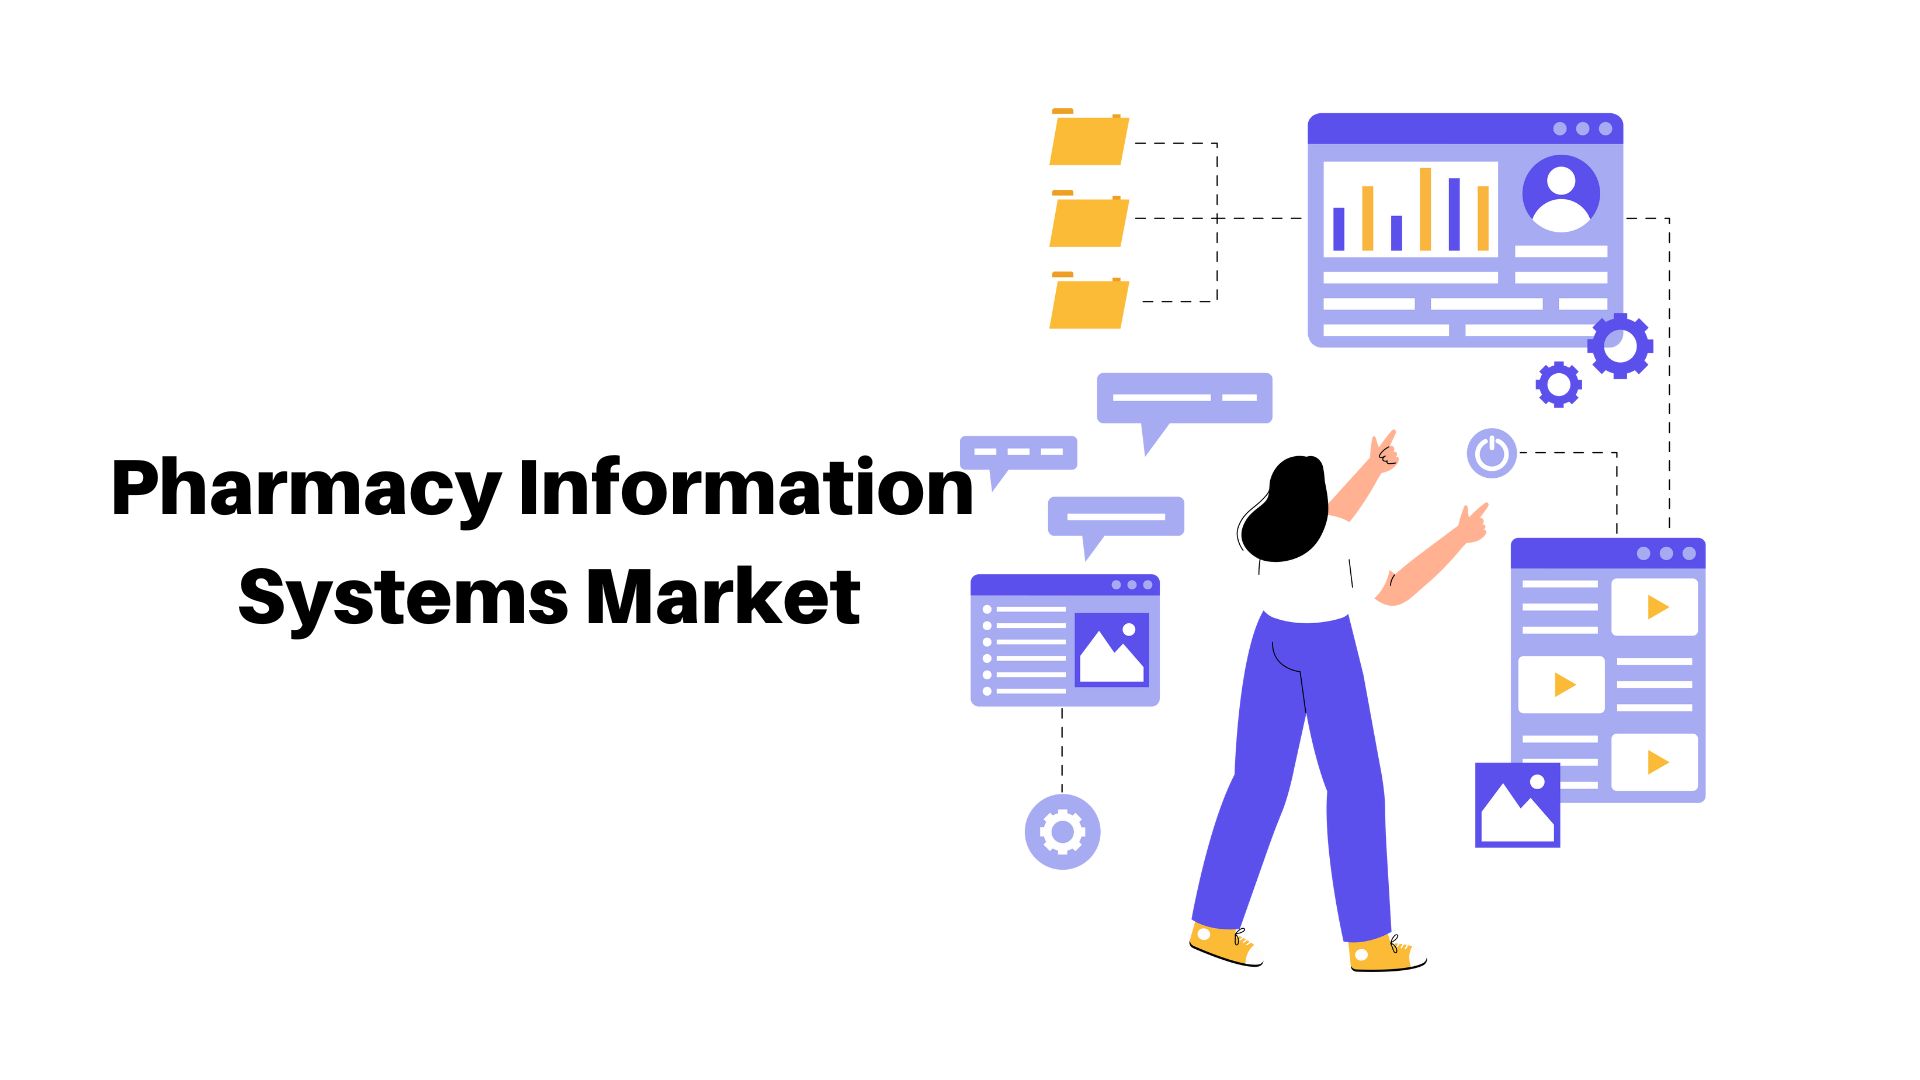 Pharmacy Information System Market Size to Reach USD 30.08 Billion by 2033, With a CAGR of 10.92%